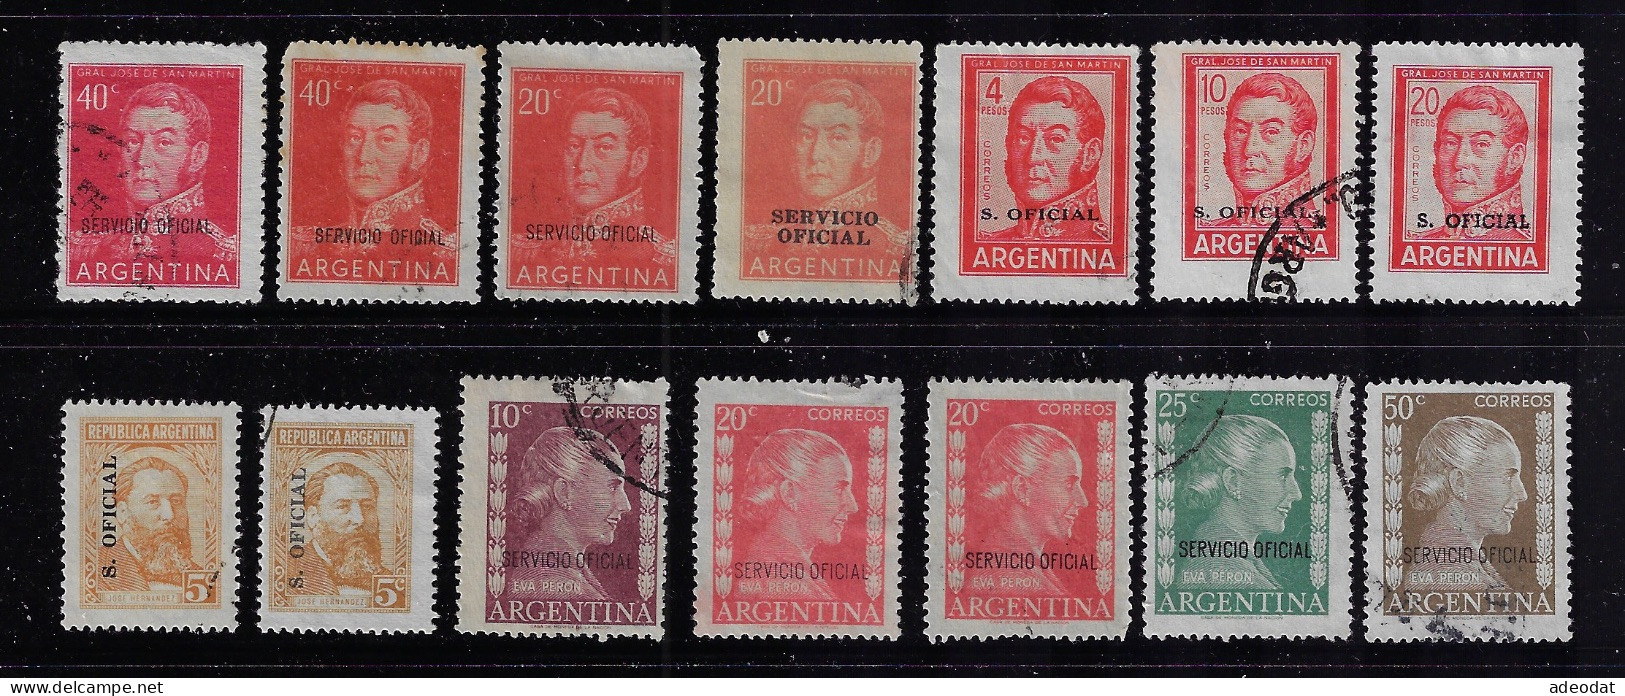 ARGENTINA 1938-1960  OFFICIAL   STAMPS  SCOTT # 35 STAMPS USED - Gebraucht